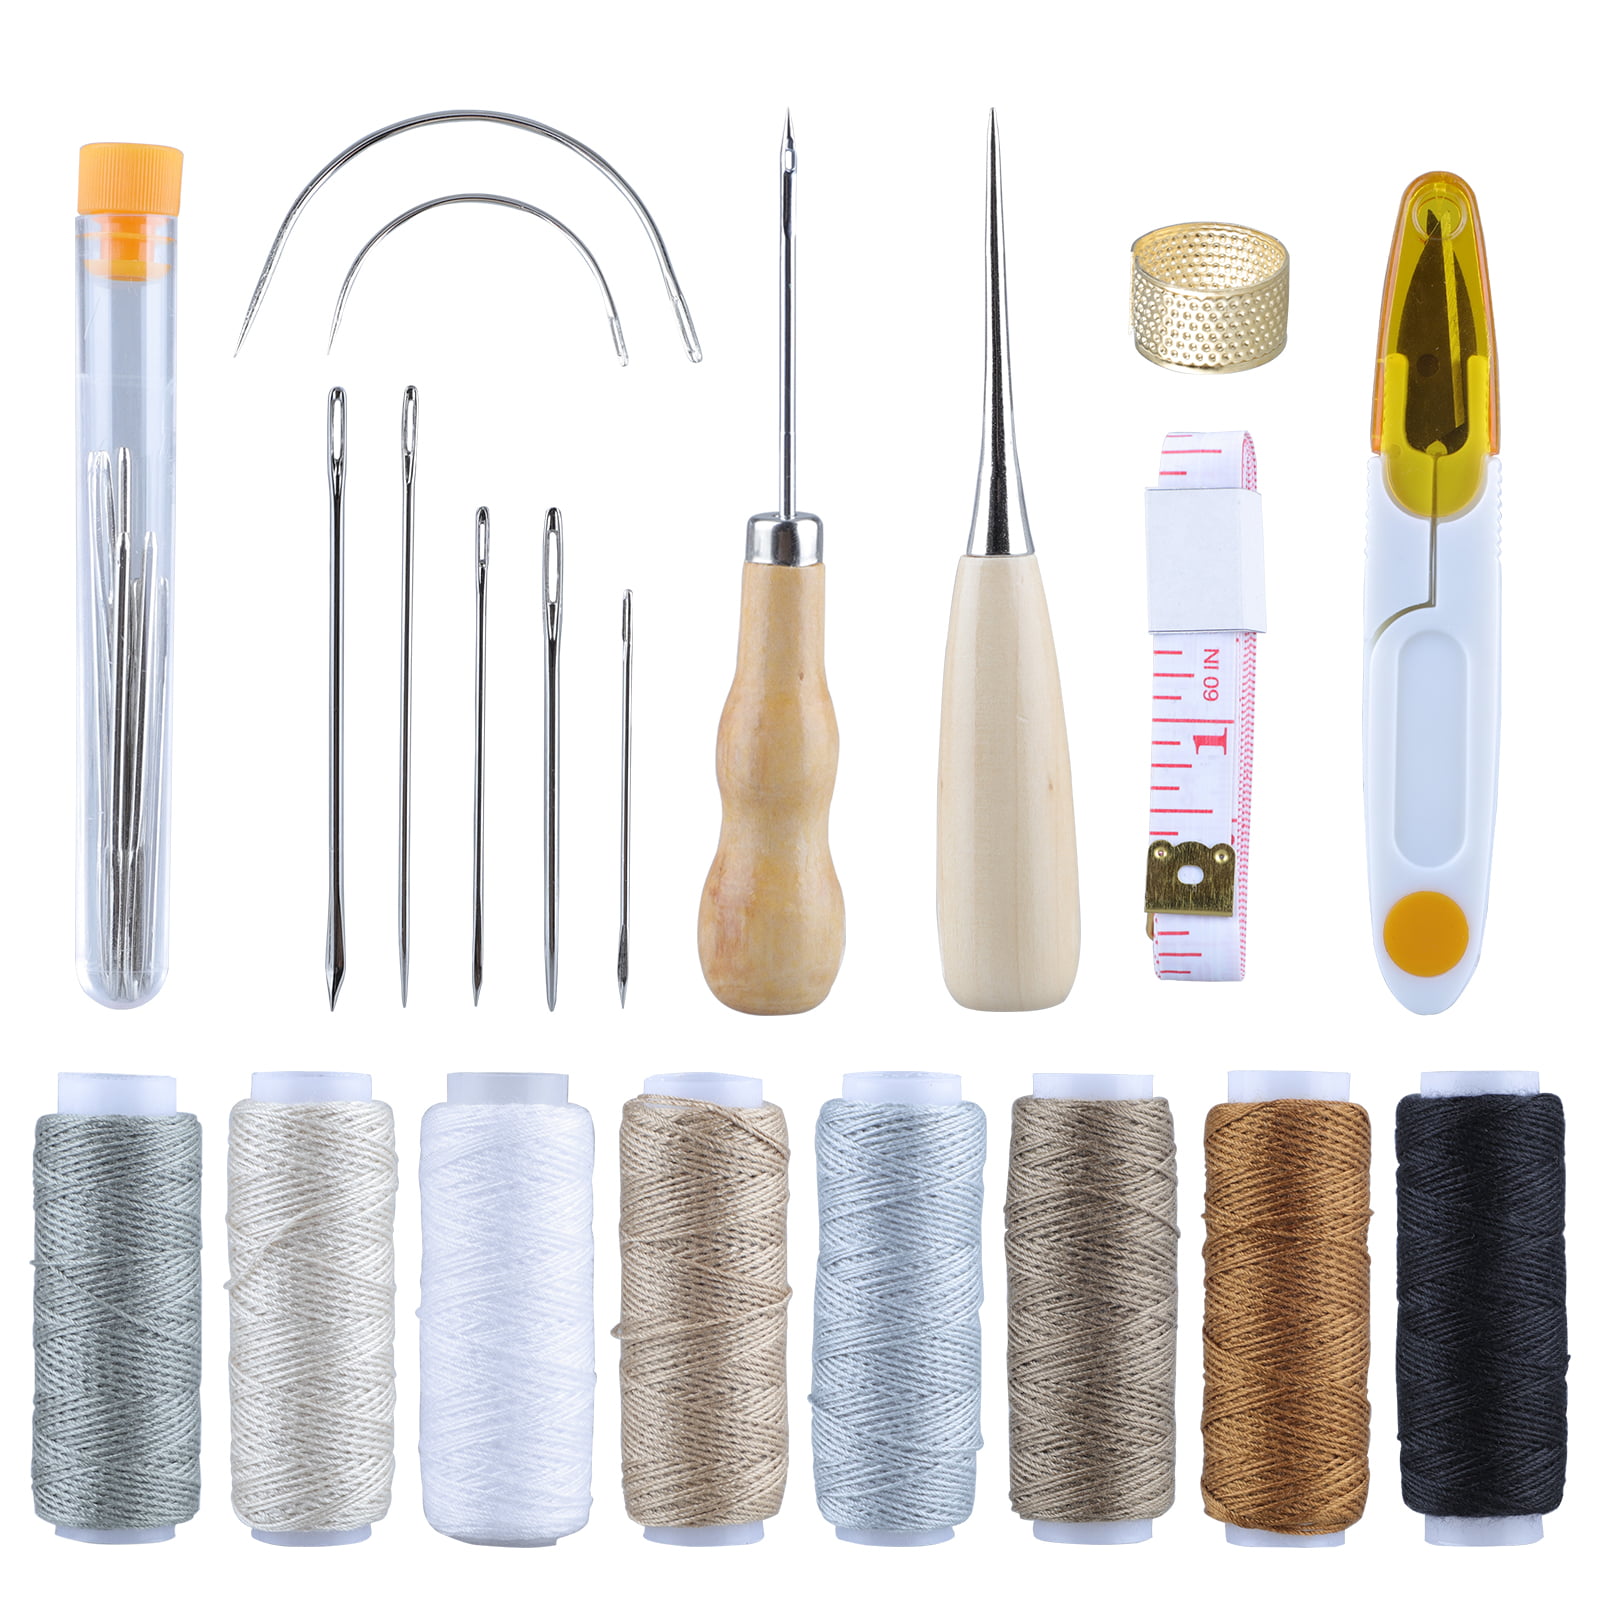 Stitching Sewing 29Pcs Leather Sewing Kit Leather Repair Upholstery Sewing Kit Include 8 Colors of Waxed Thread Leather Sewing Needles Leather Awl for Leather Repair 